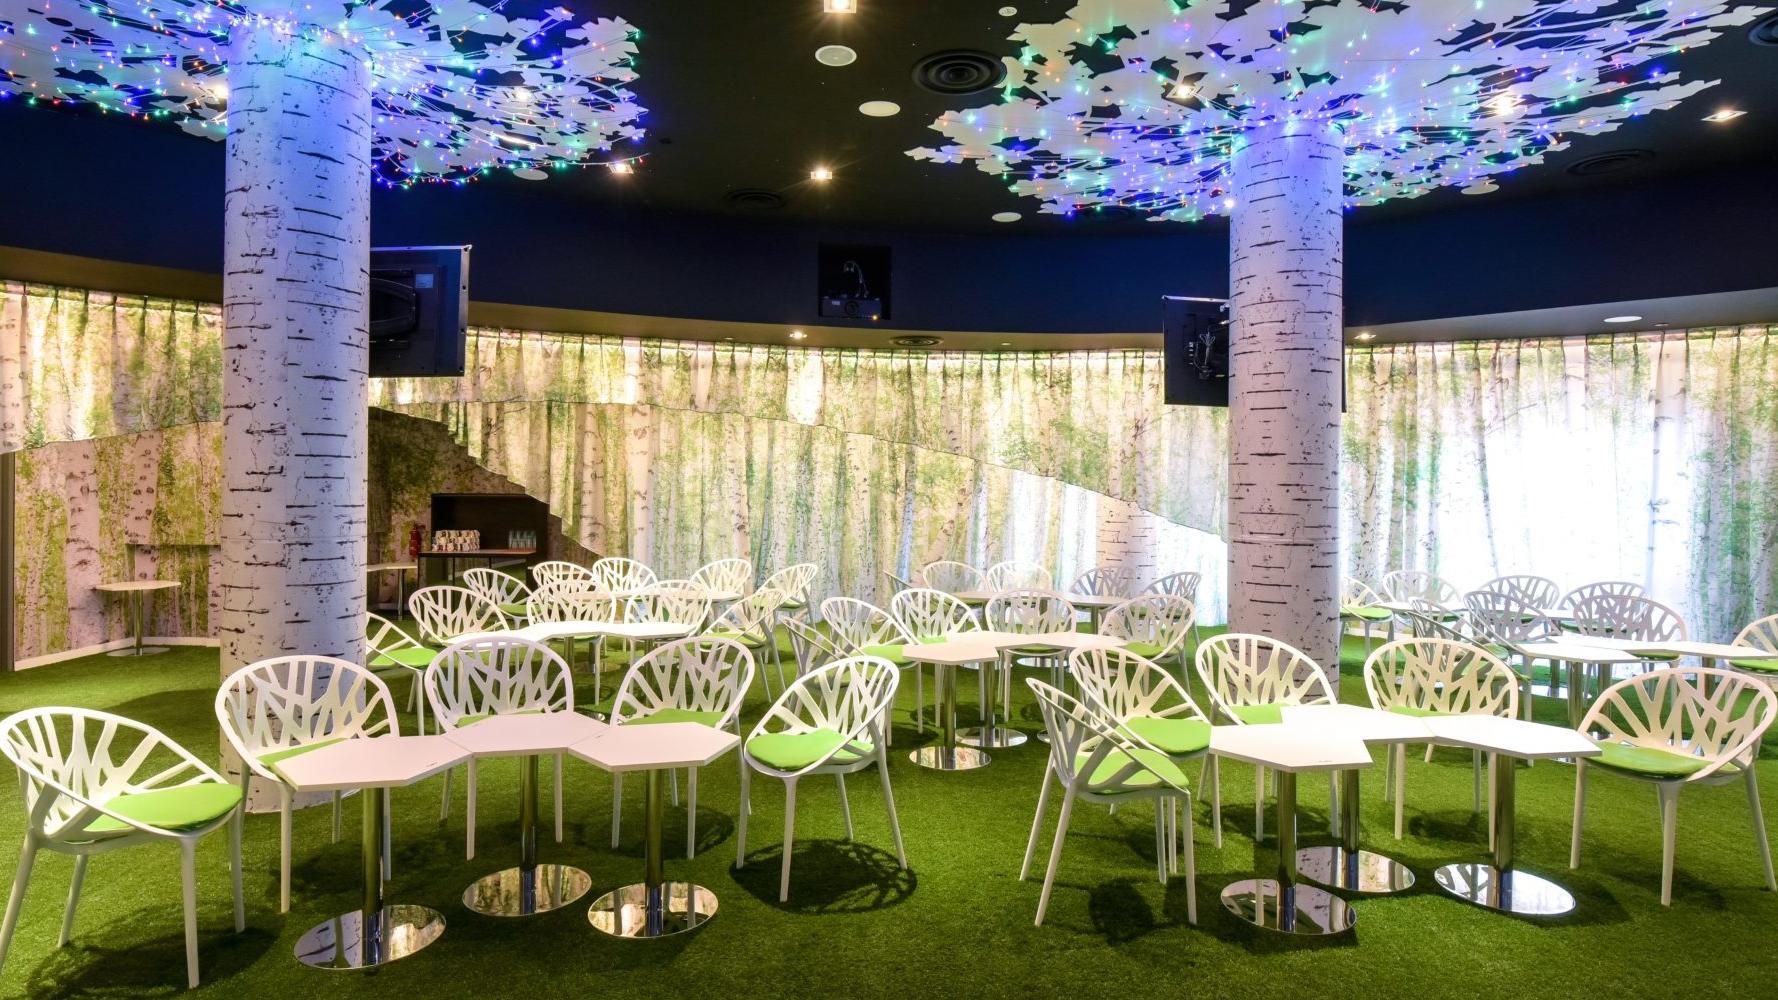 Unusual Venues for Rent in Singapore